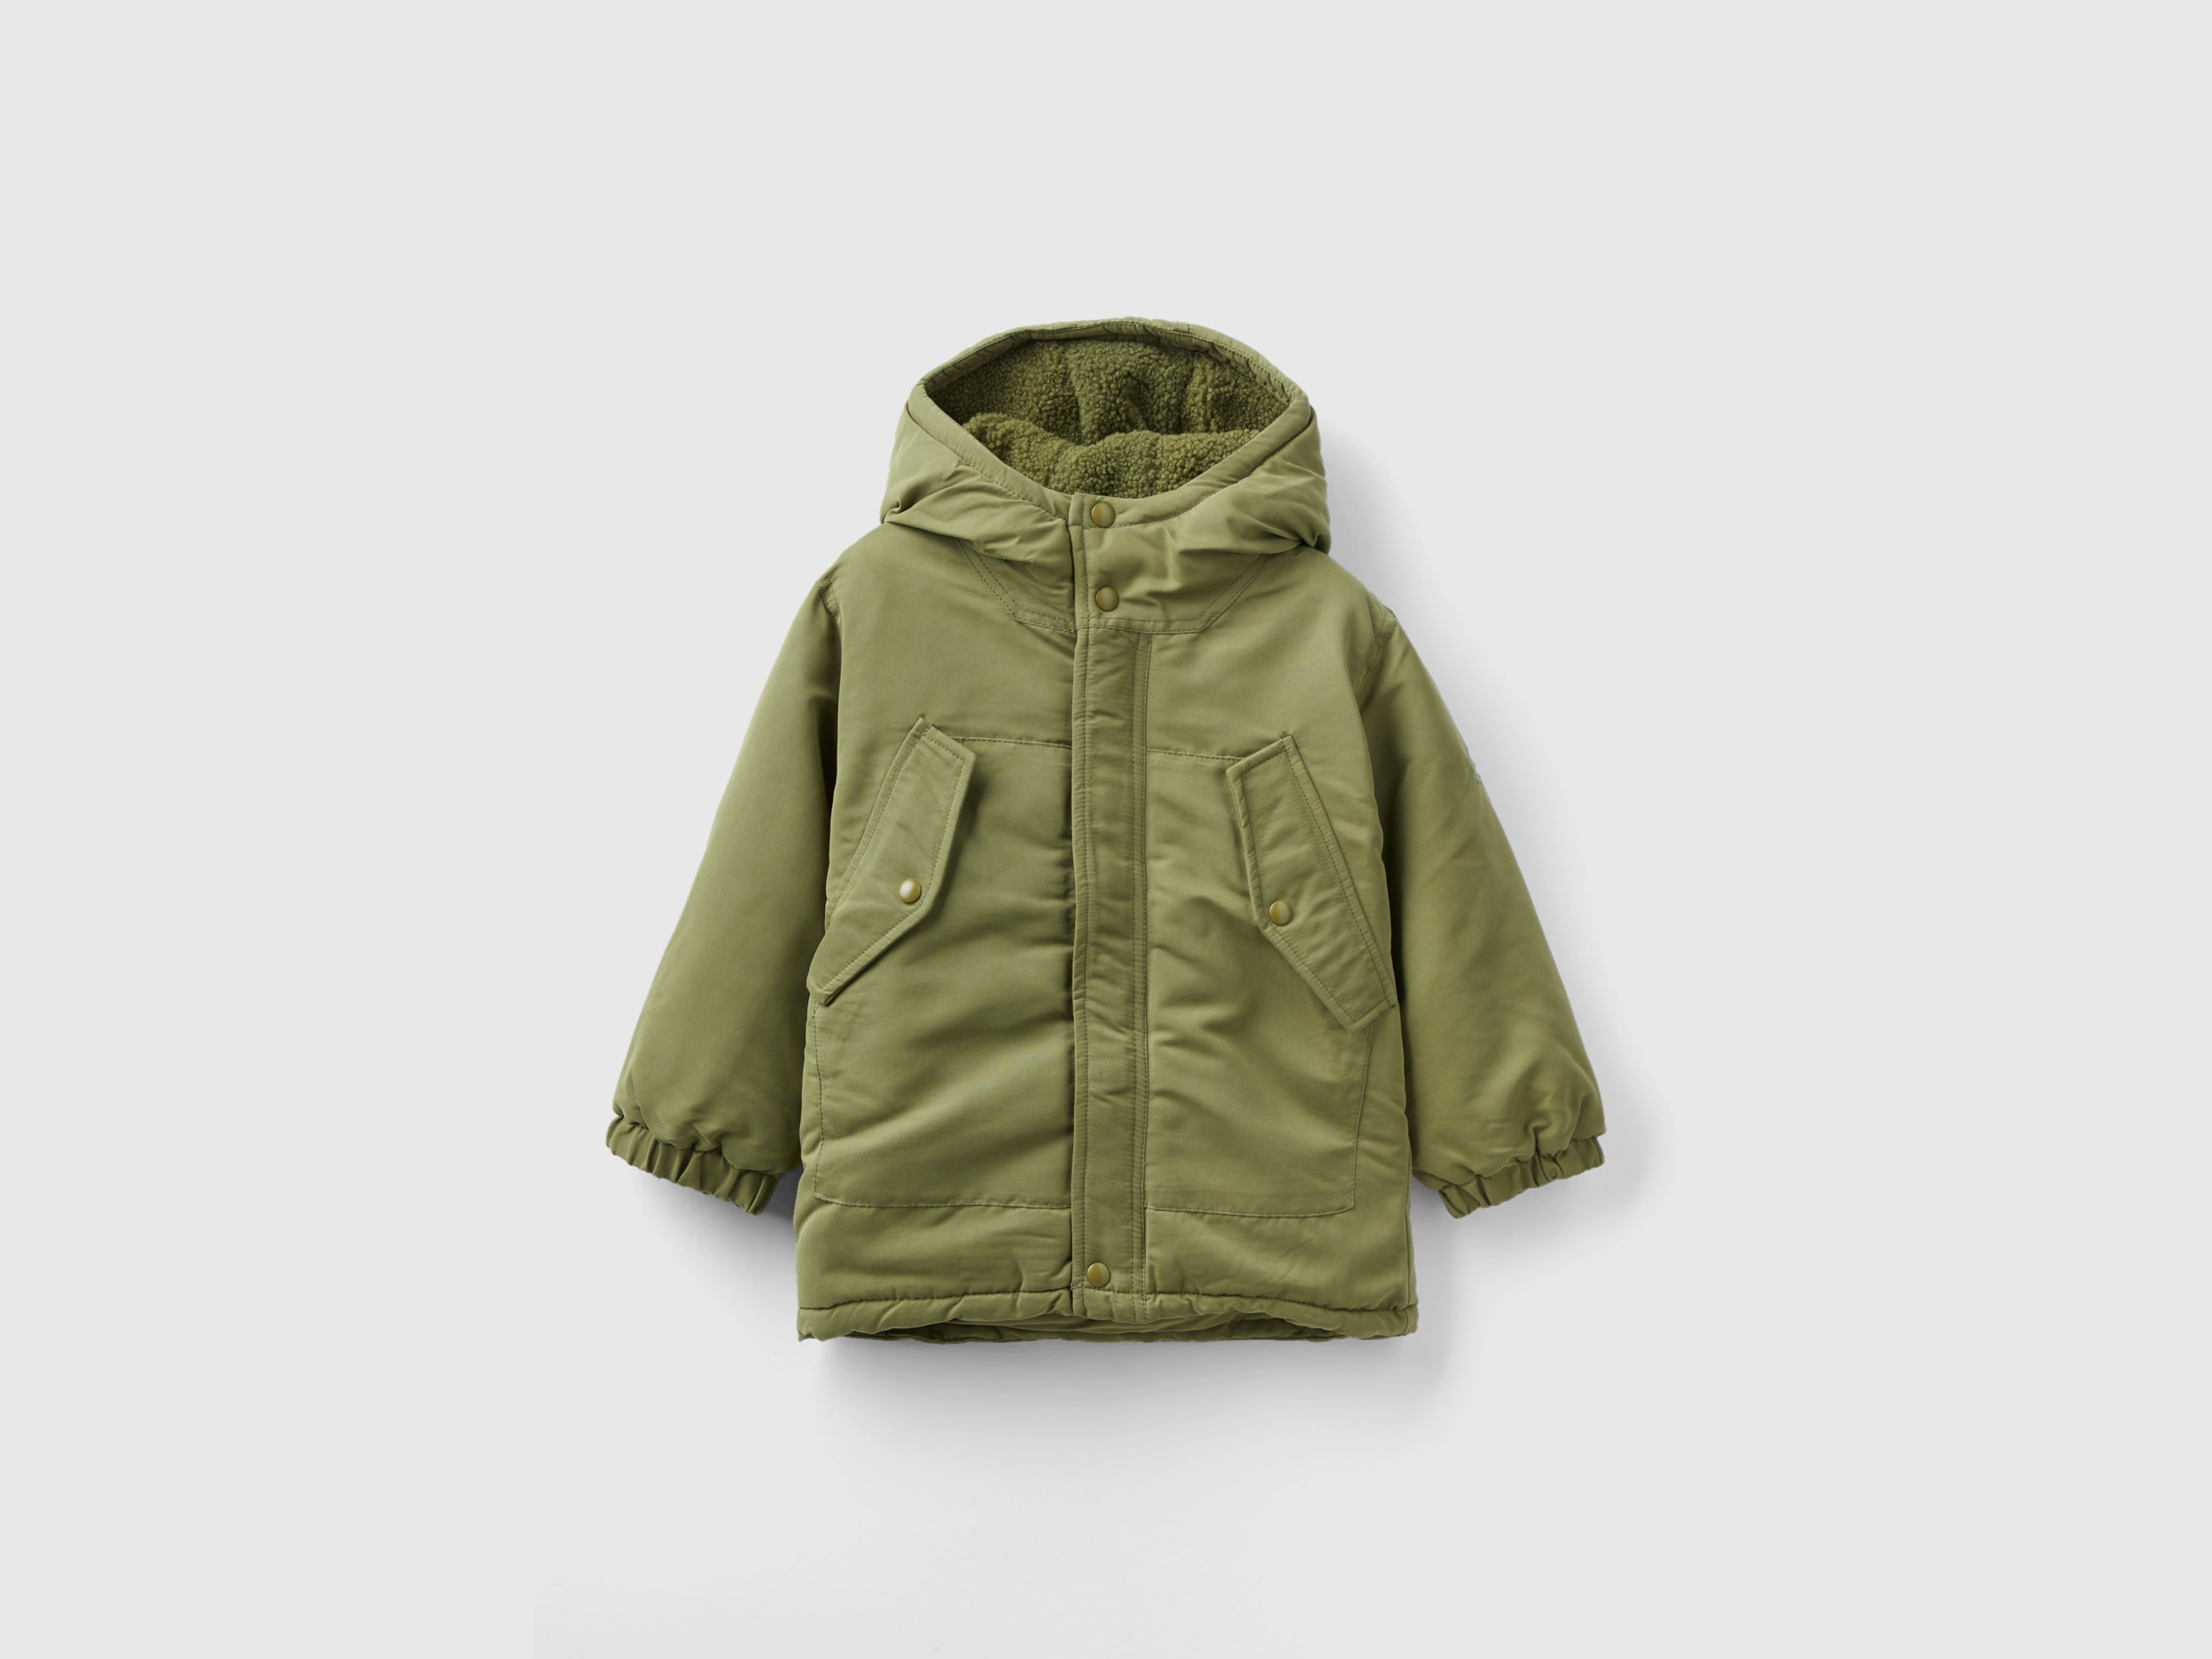 Benetton, Padded Parka With Pockets, size 2-3, Military Green, Kids